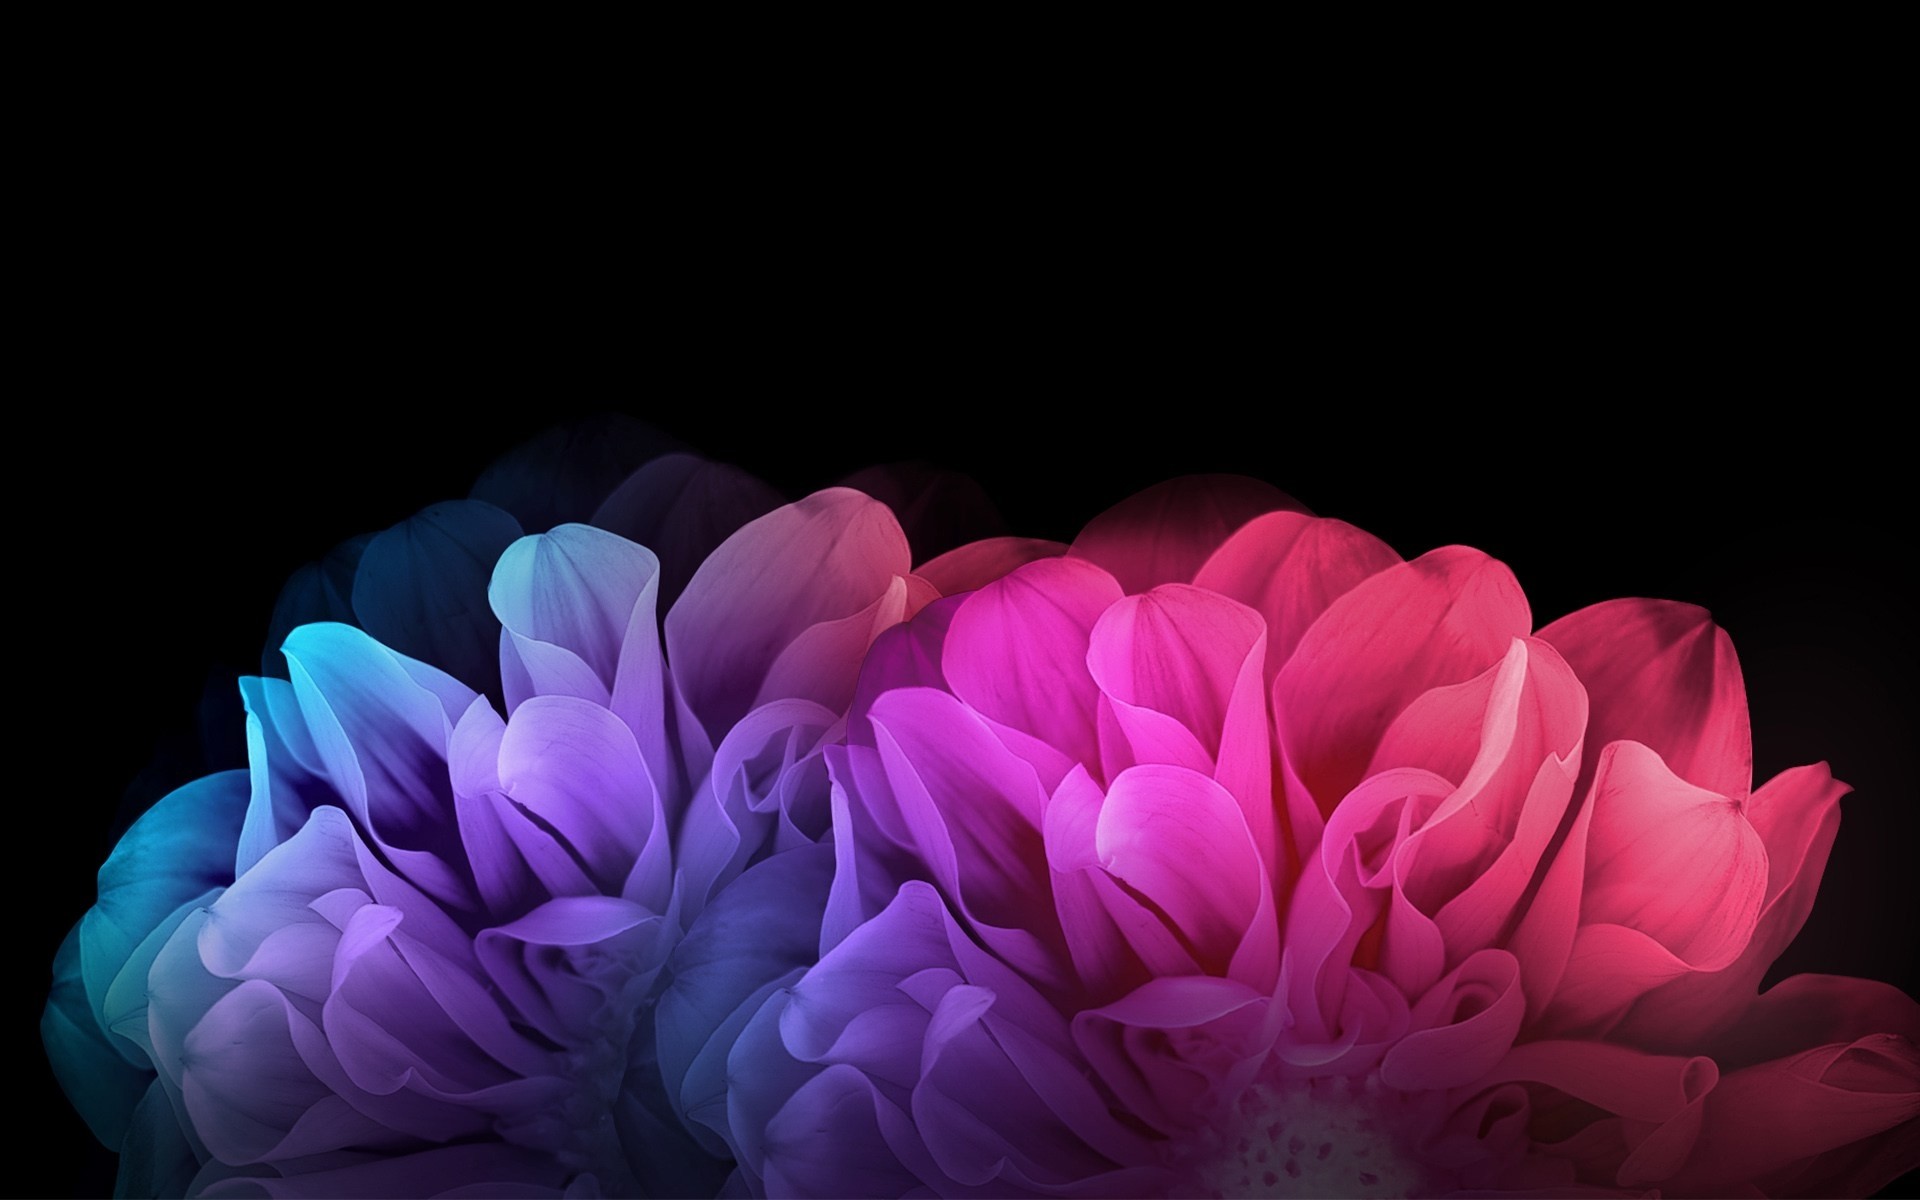 Colorful Flowers Dark Background Wallpapers - Flower Black Background Hd - HD Wallpaper 